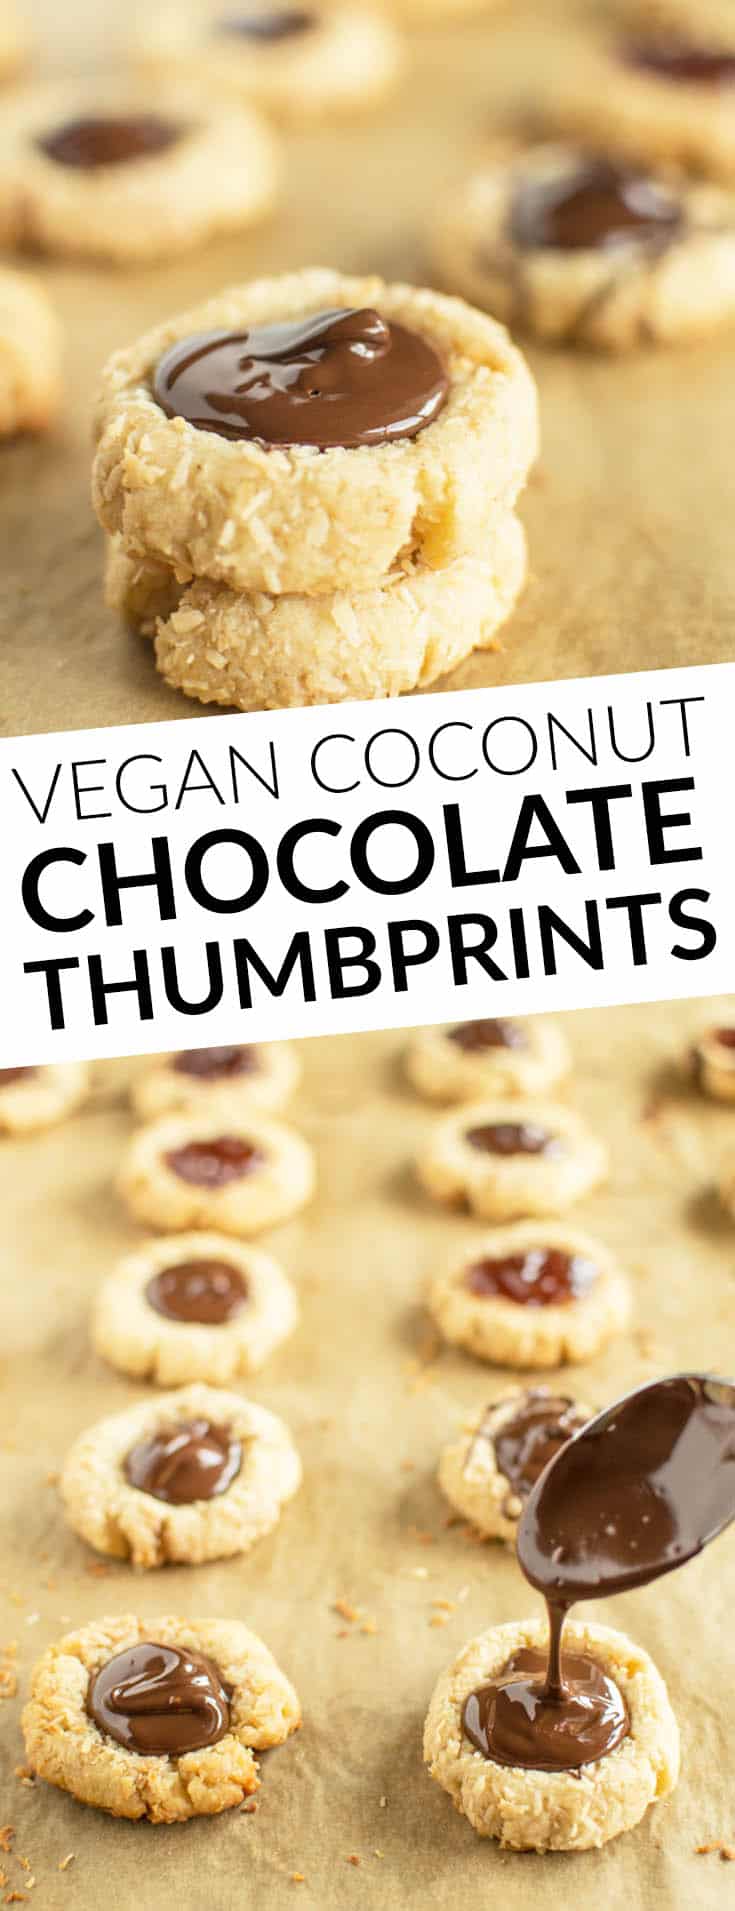 Buttery Vegan Coconut Chocolate Thumbprints are perfect for any occasion! by Lisa Lin | @healthynibs